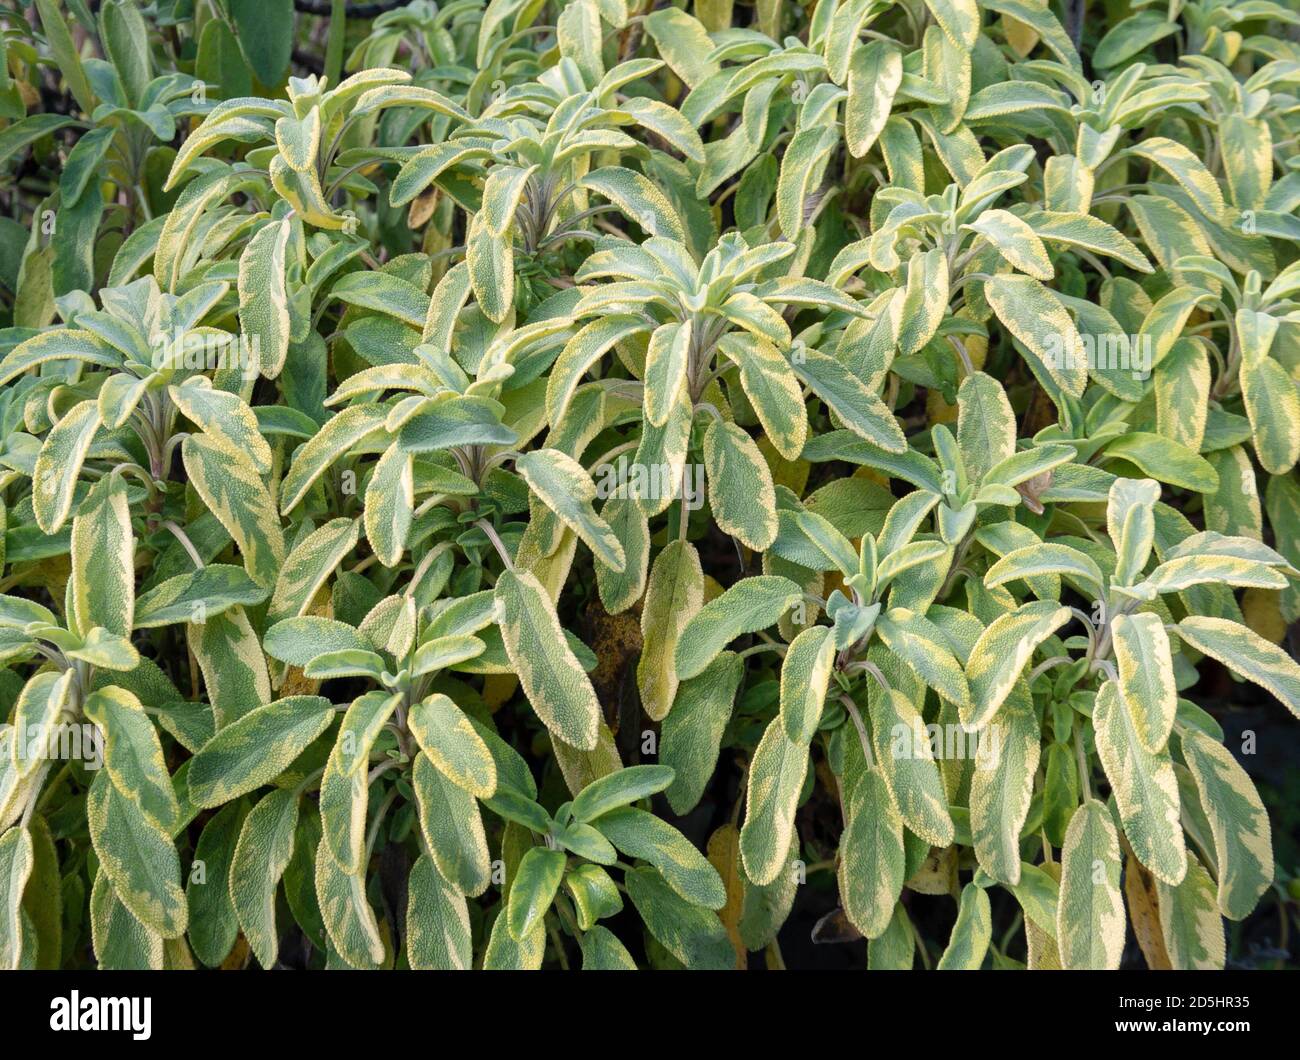 Sage cultivar with yellow-green variegated leaves. Salvia officinalis. Stock Photo